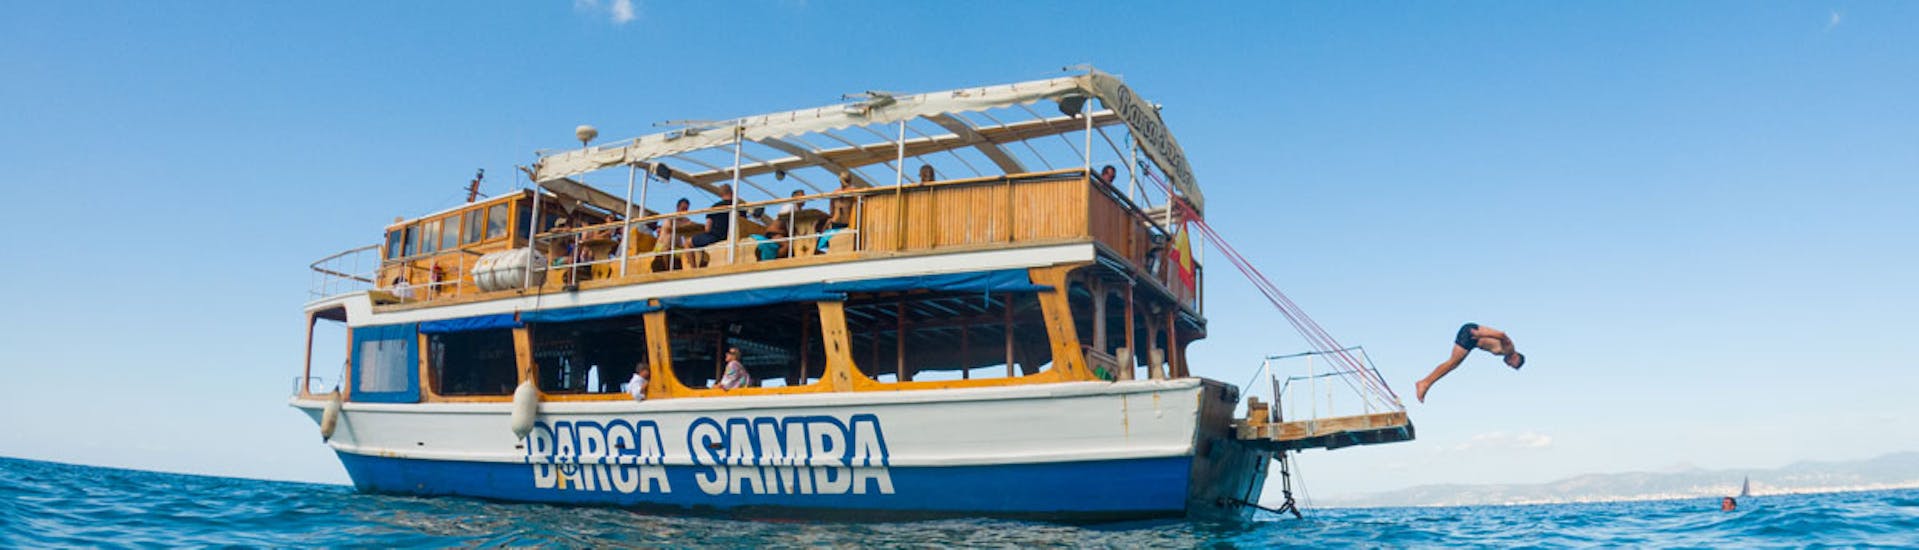 A boat of Samba Boat celebrating a party boat trip from Palma de Mallorca with DJ & lunch included.